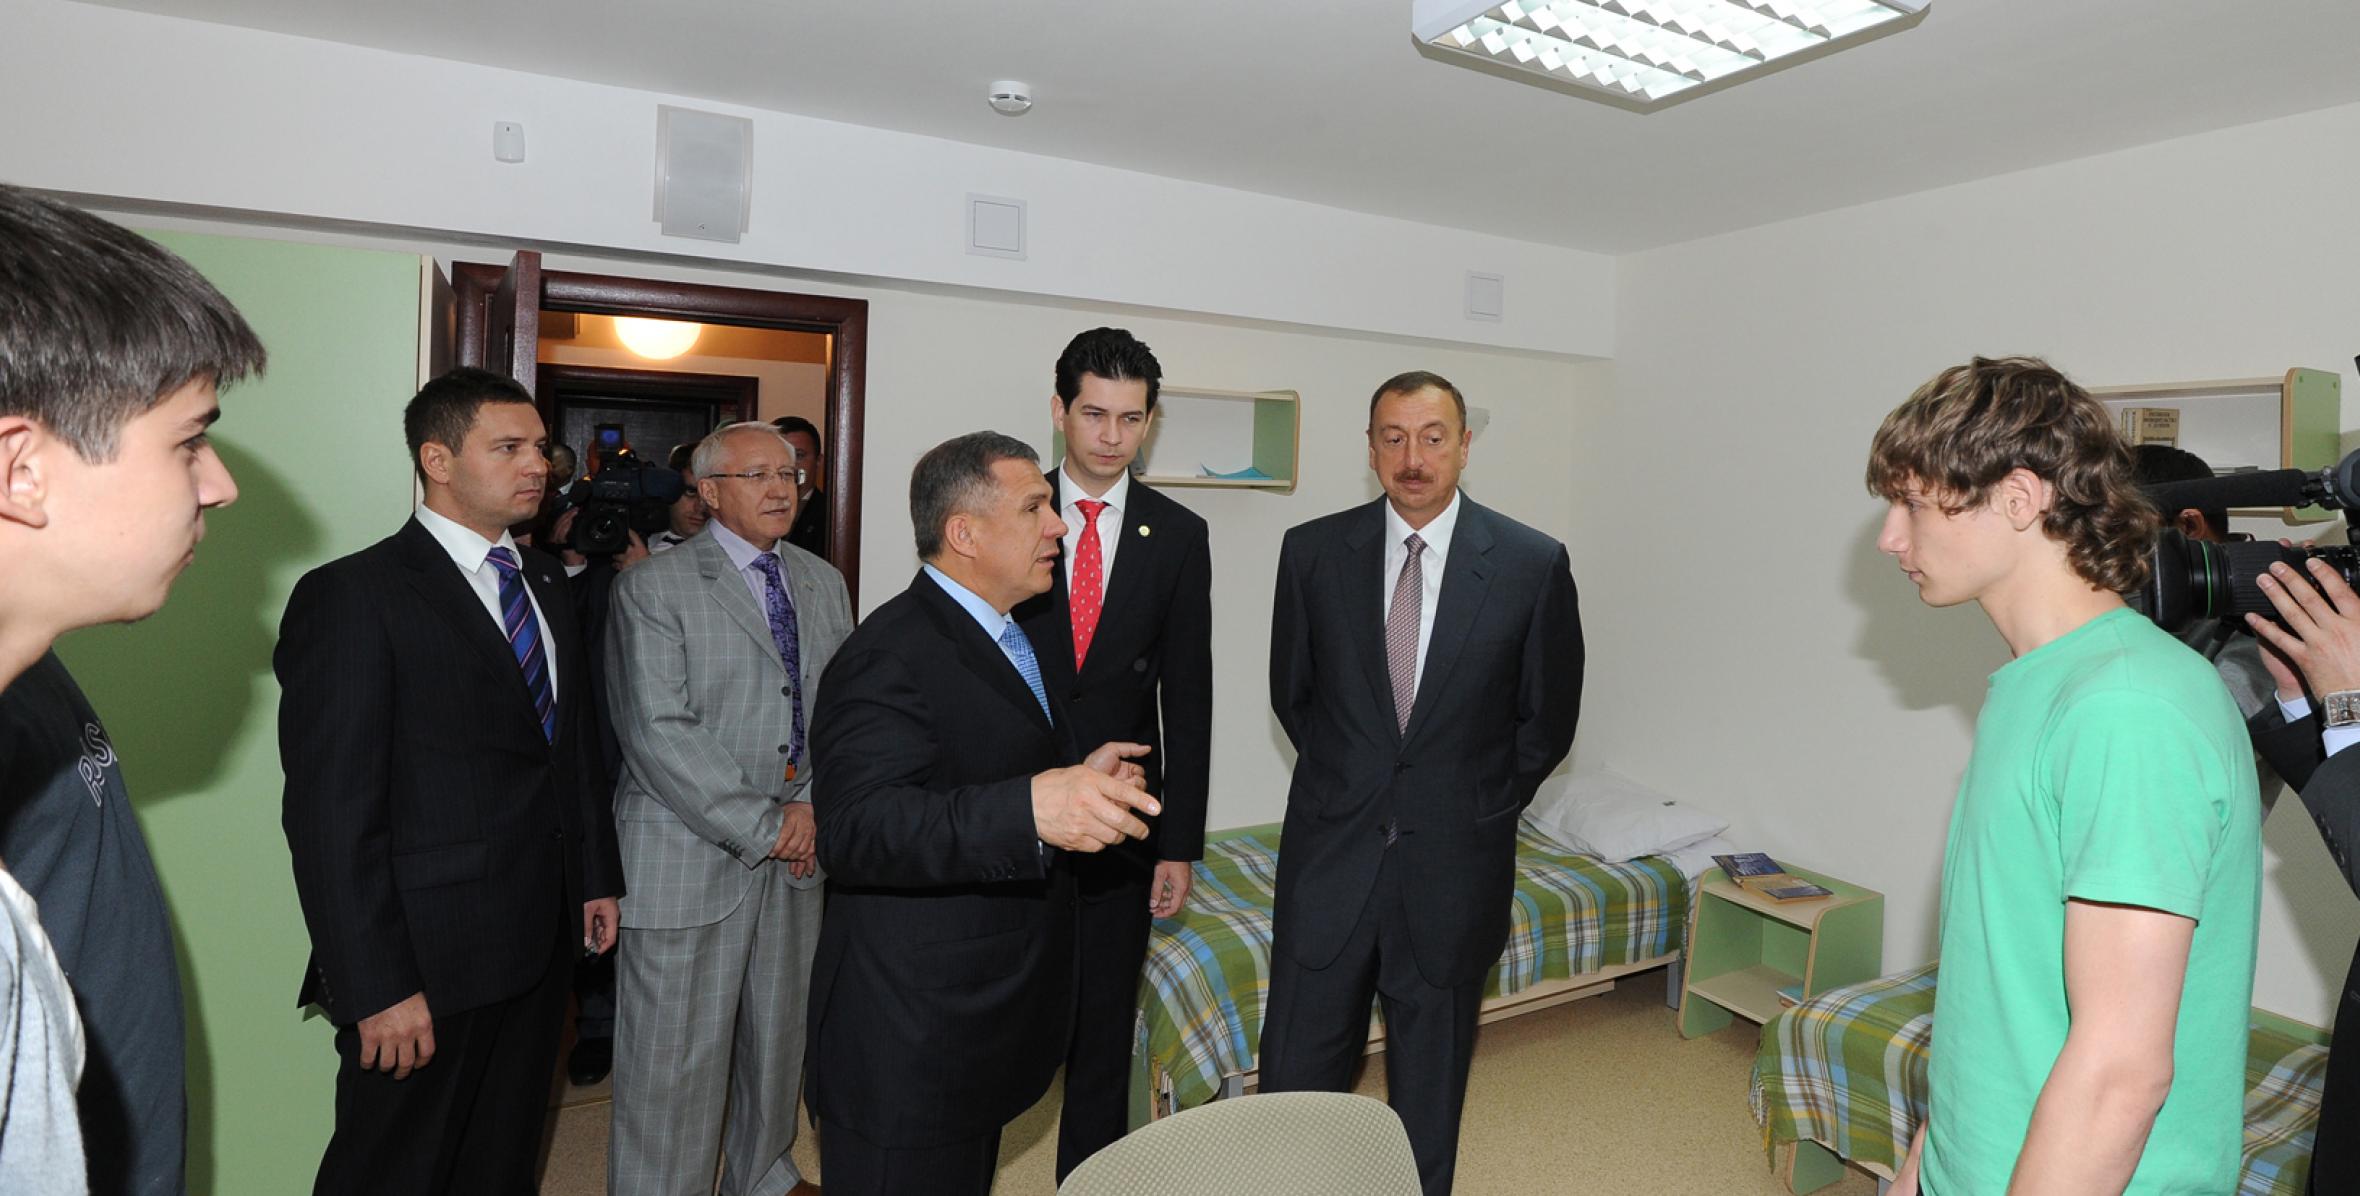 Ilham Aliyev reviewed the village of the 27th World University Games due in Kazan in 2013